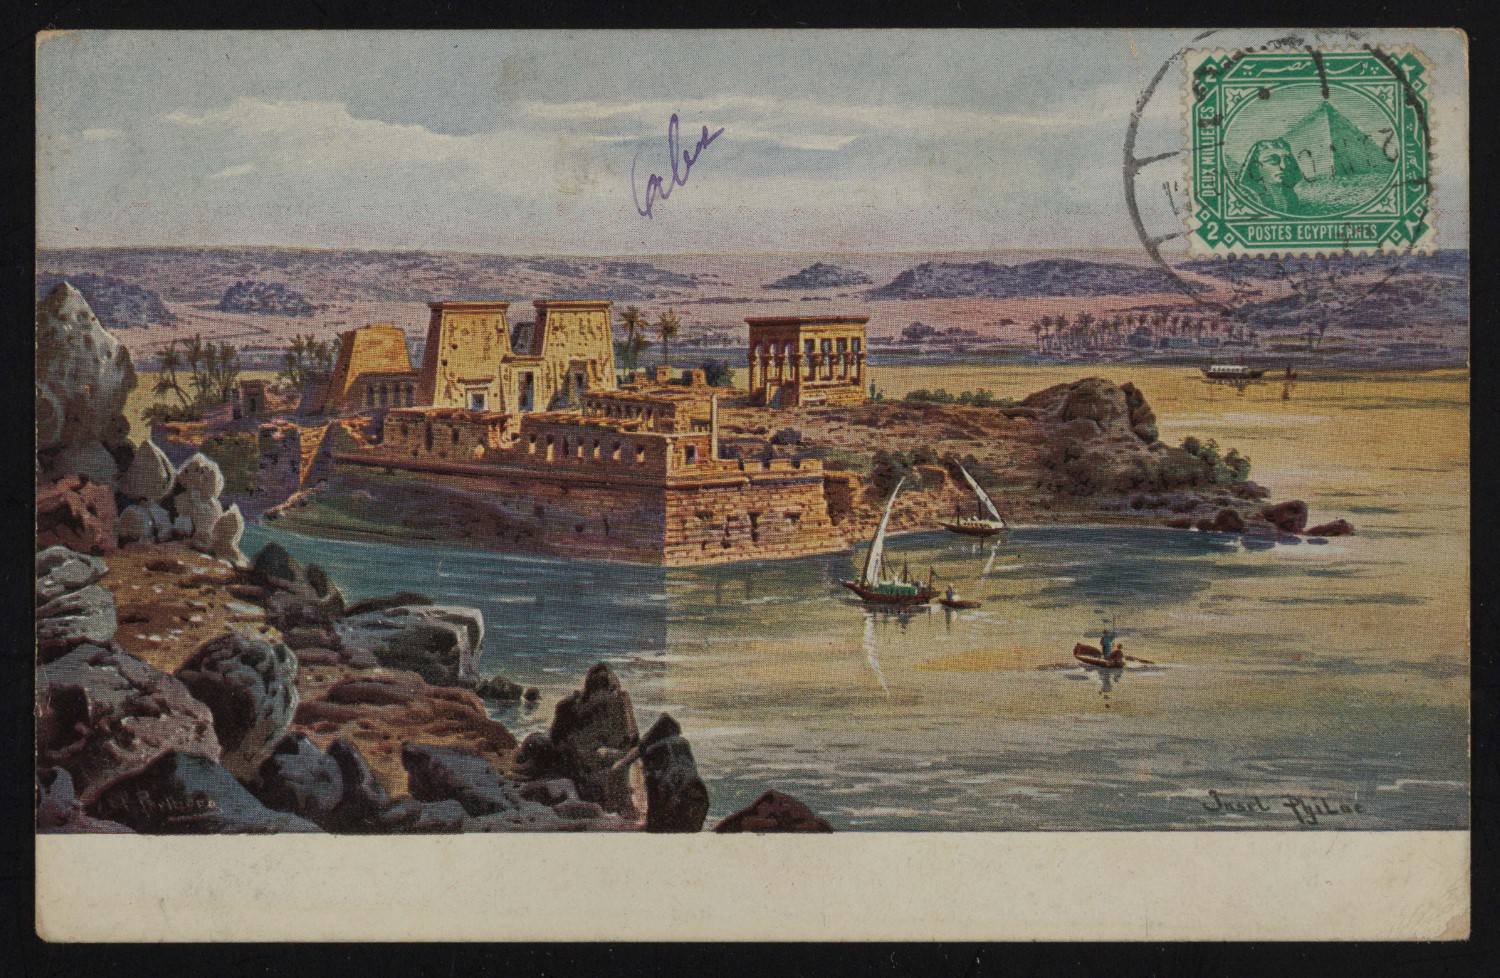 Postcard of an ancient Egyptian site